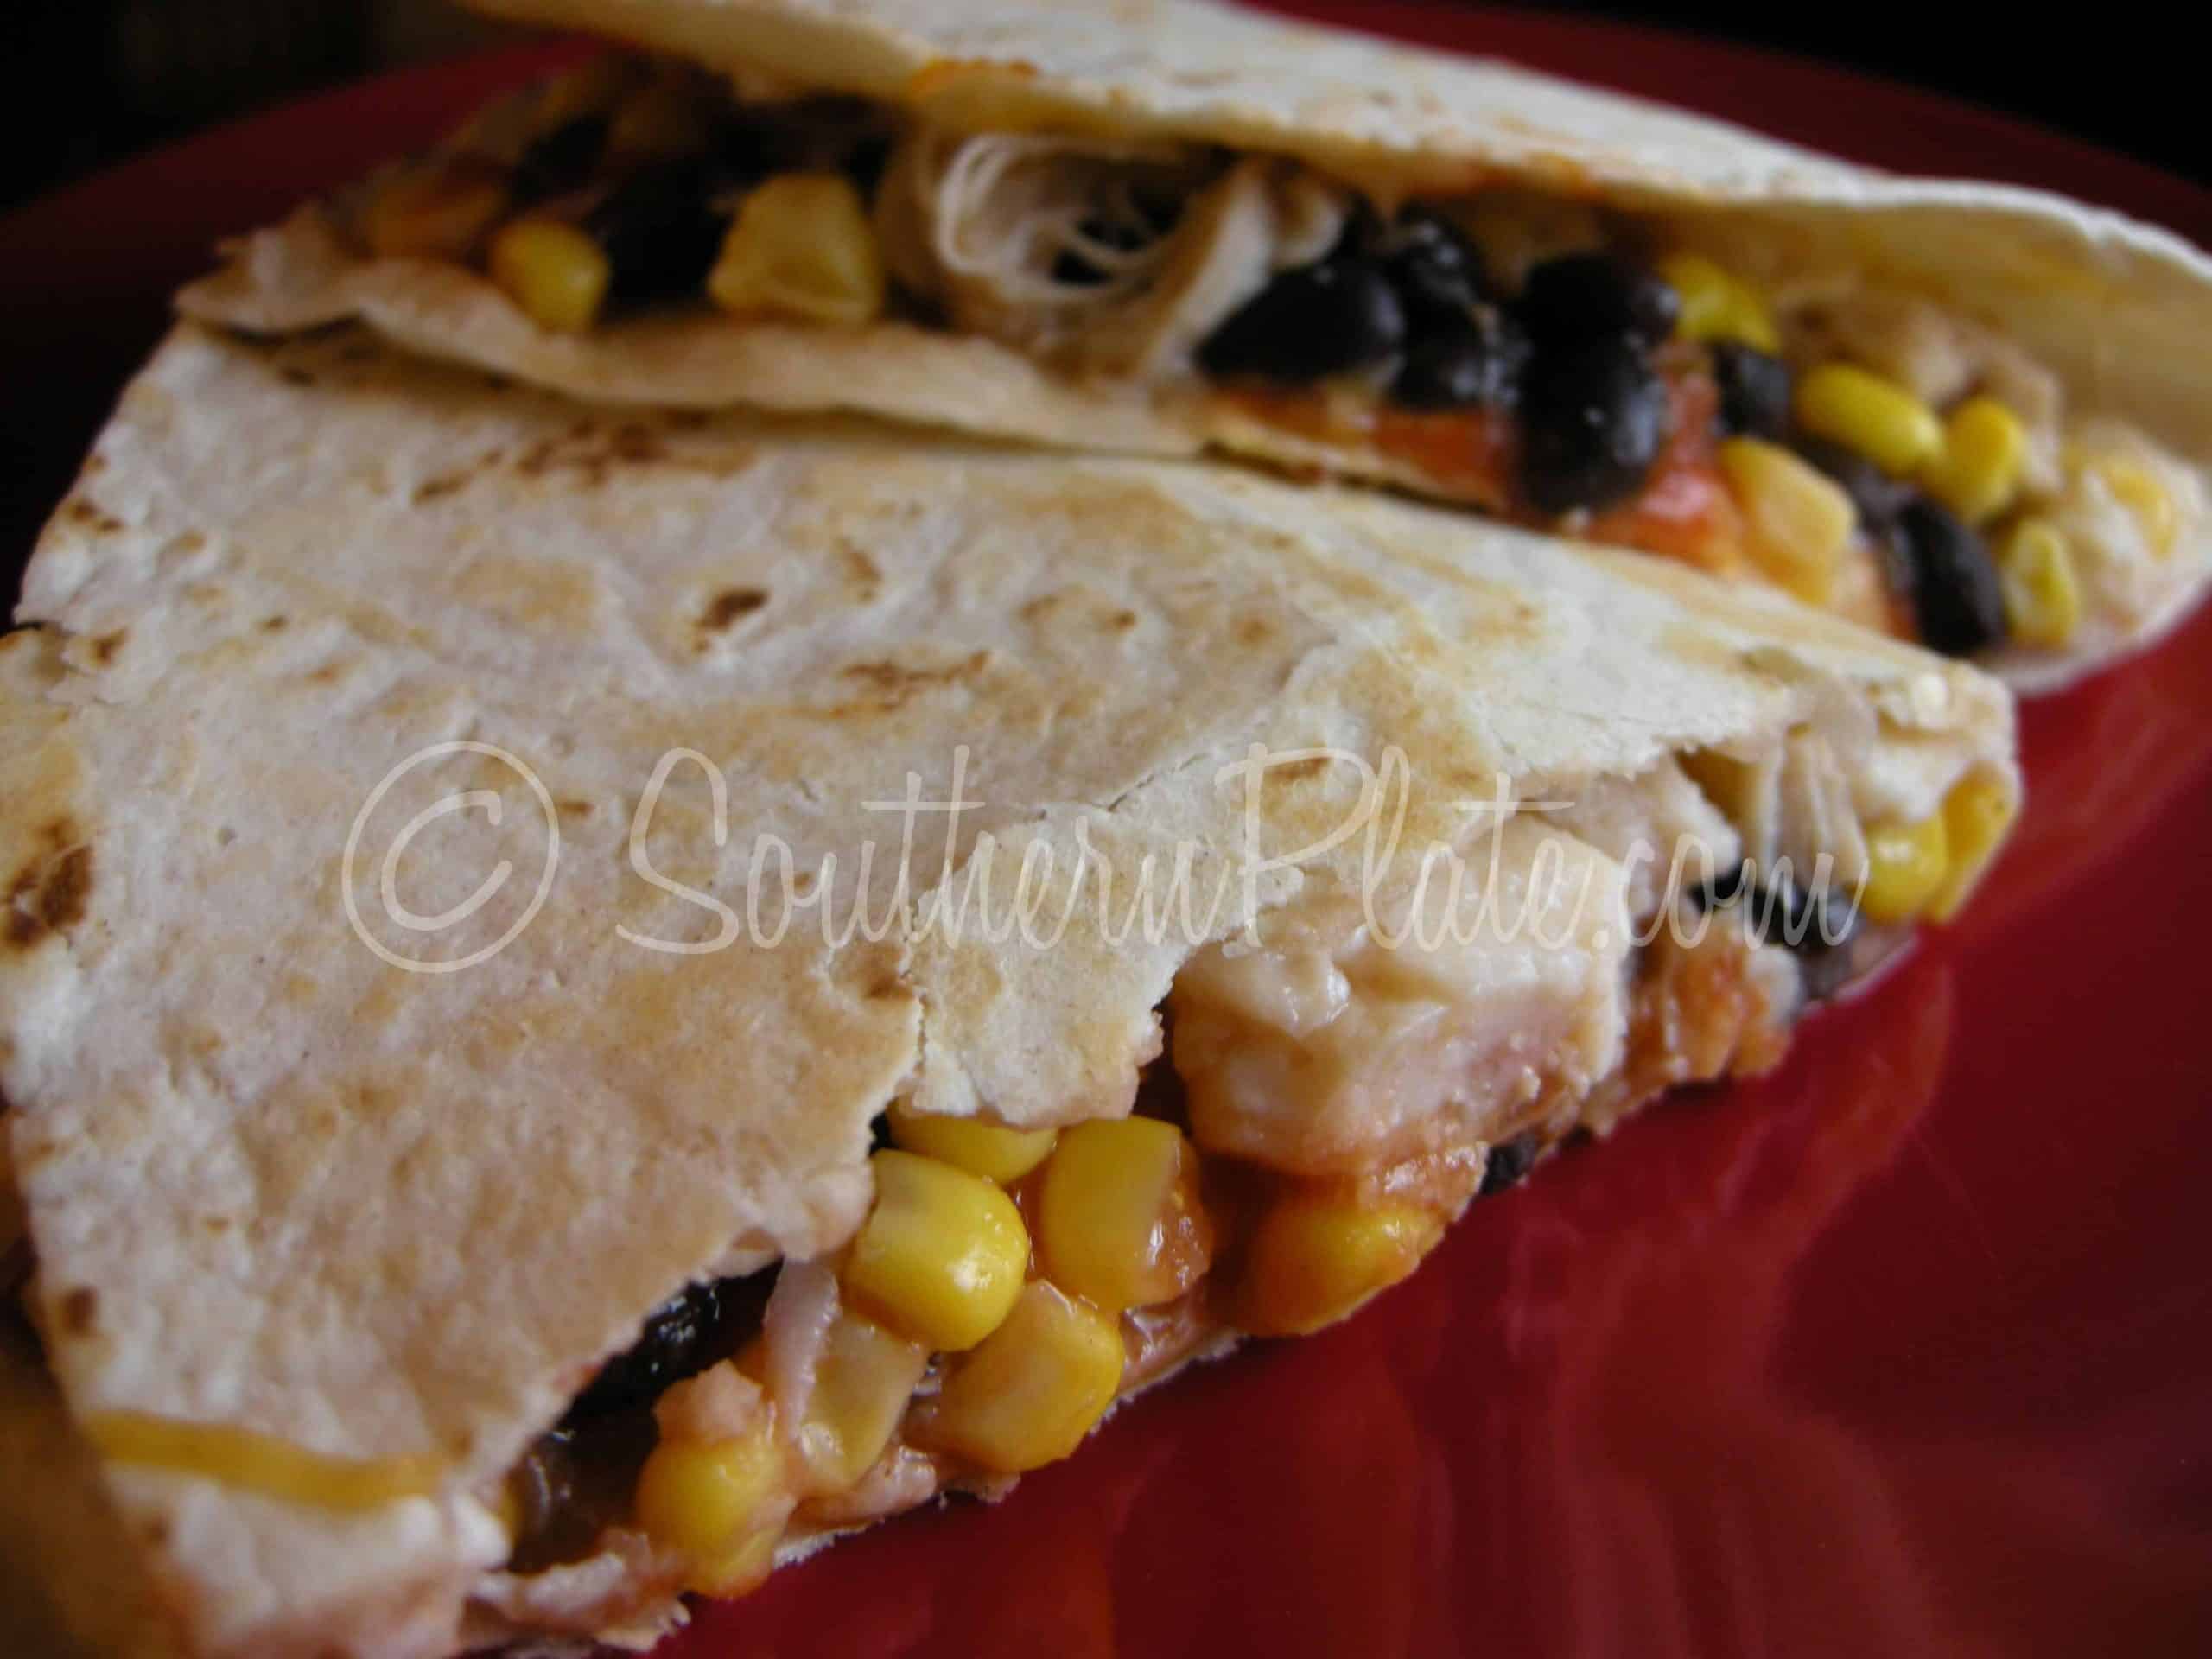 Simplified Quesadillas – And Chance To Win $75 in Gift Cards from Kraft